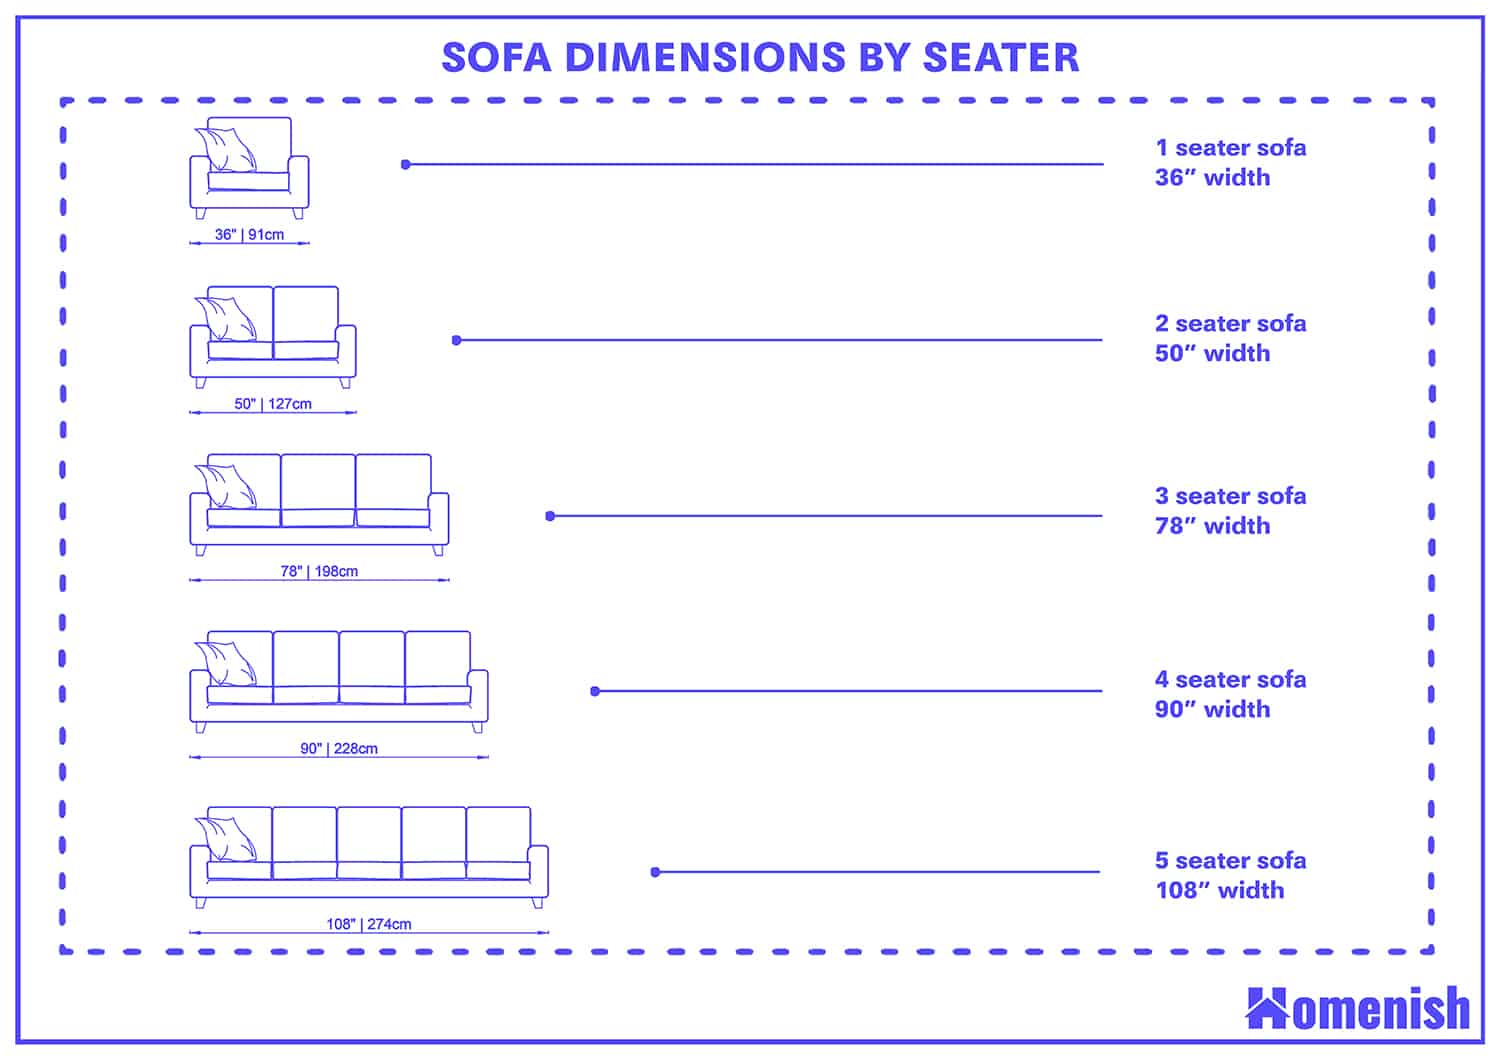 Sofa Dimenions By Seater 